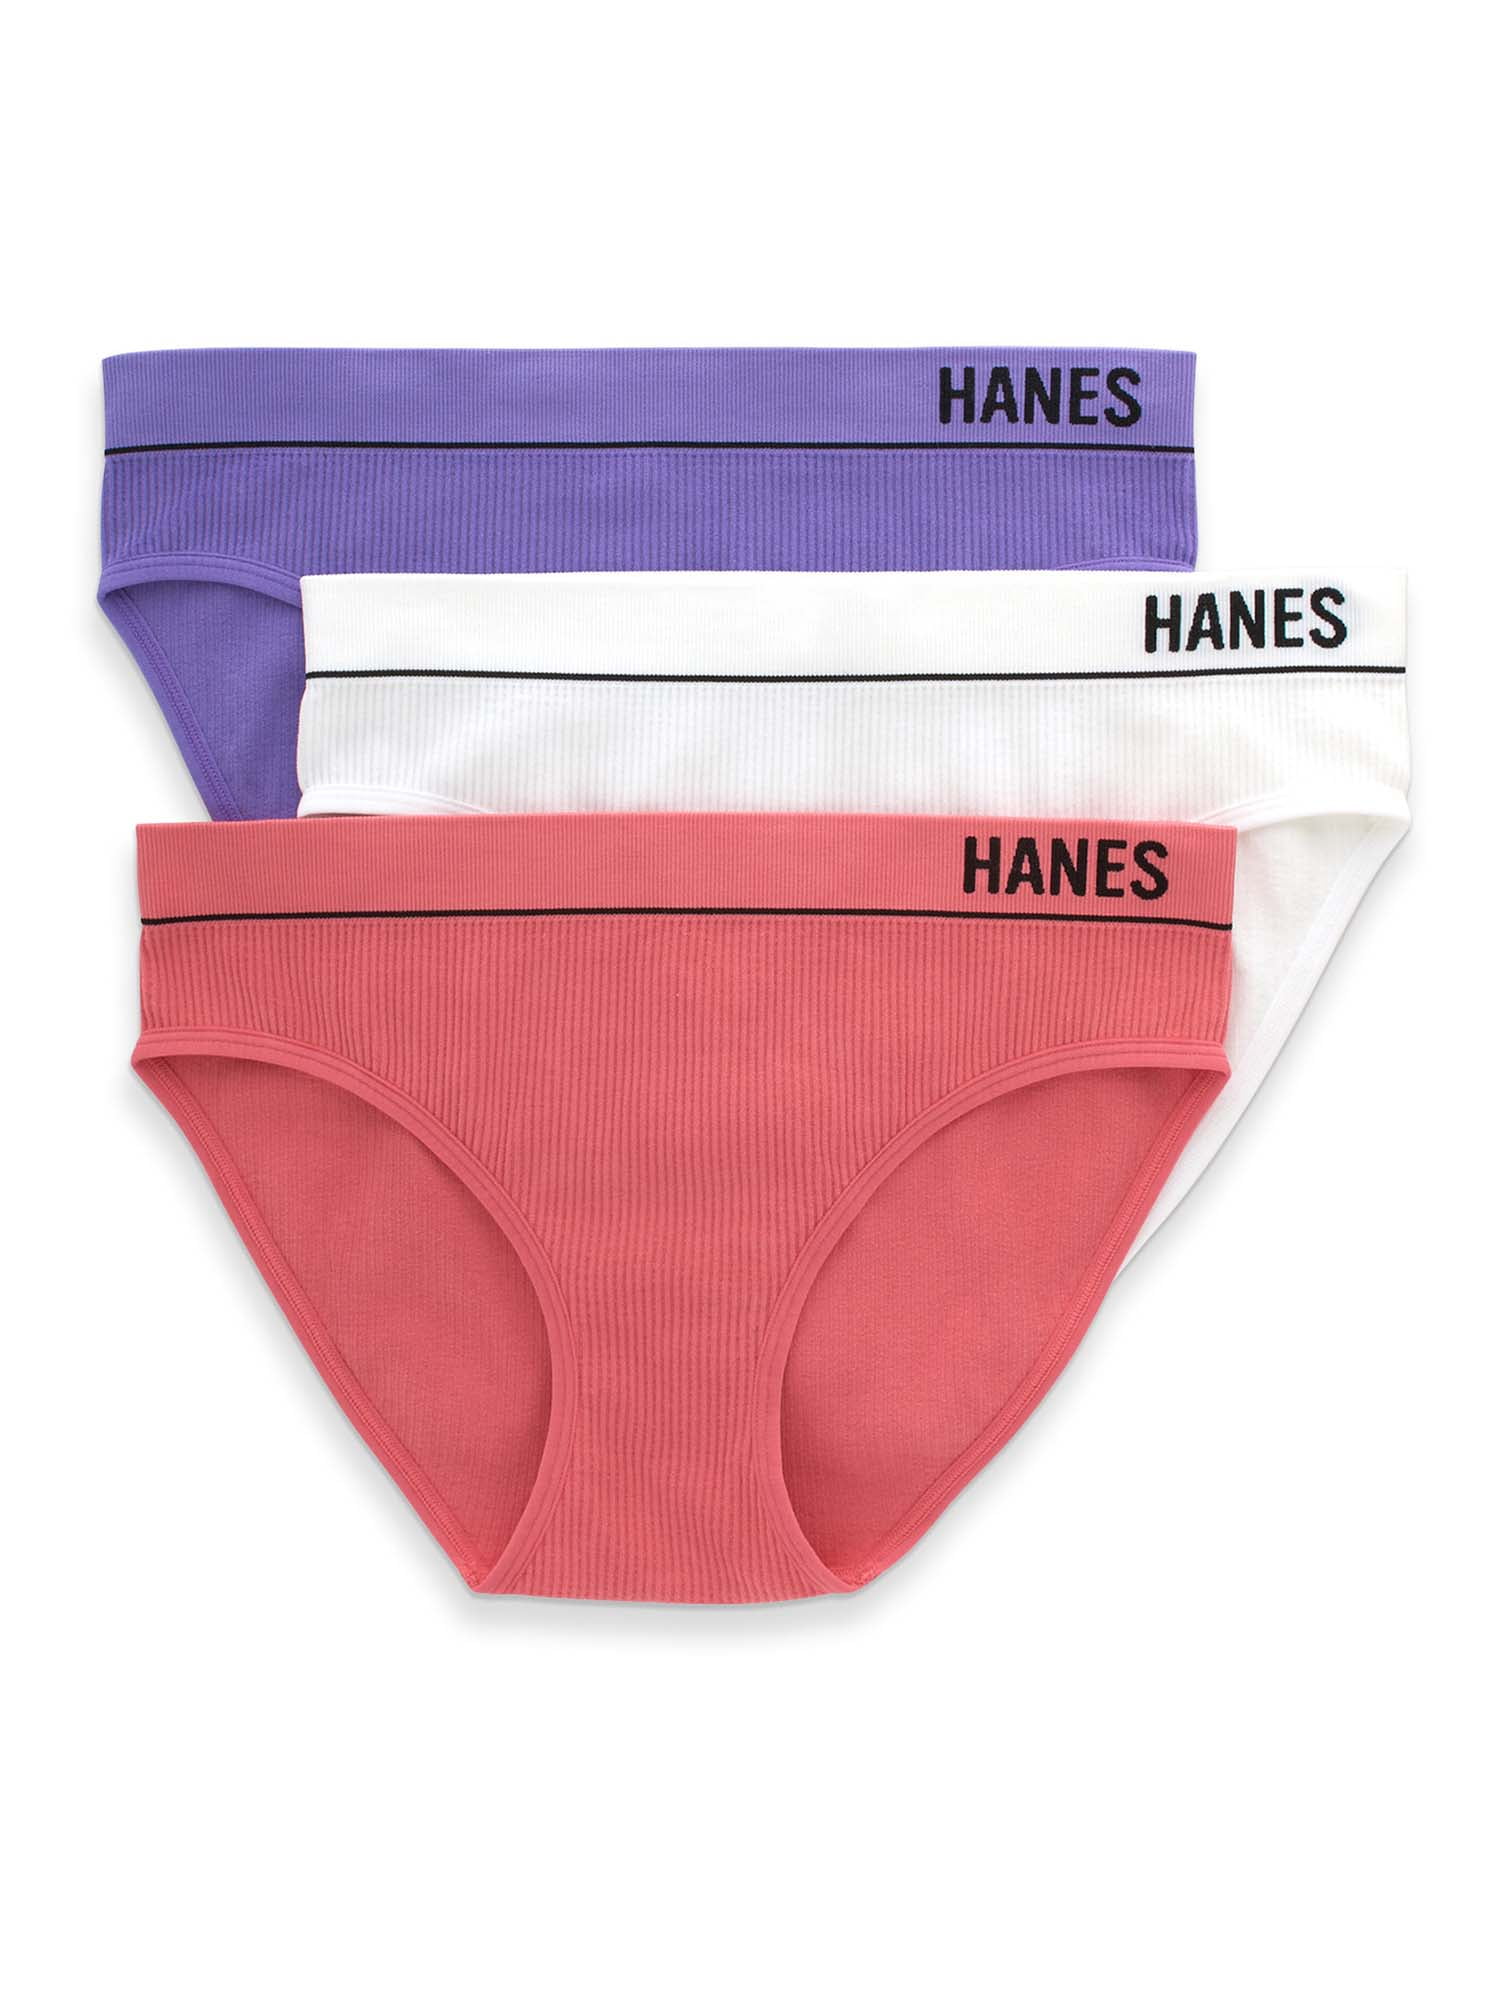 Hanes, Fruit of the Loom - Seamless Comfort Soft Underwear Various Styles  Colors